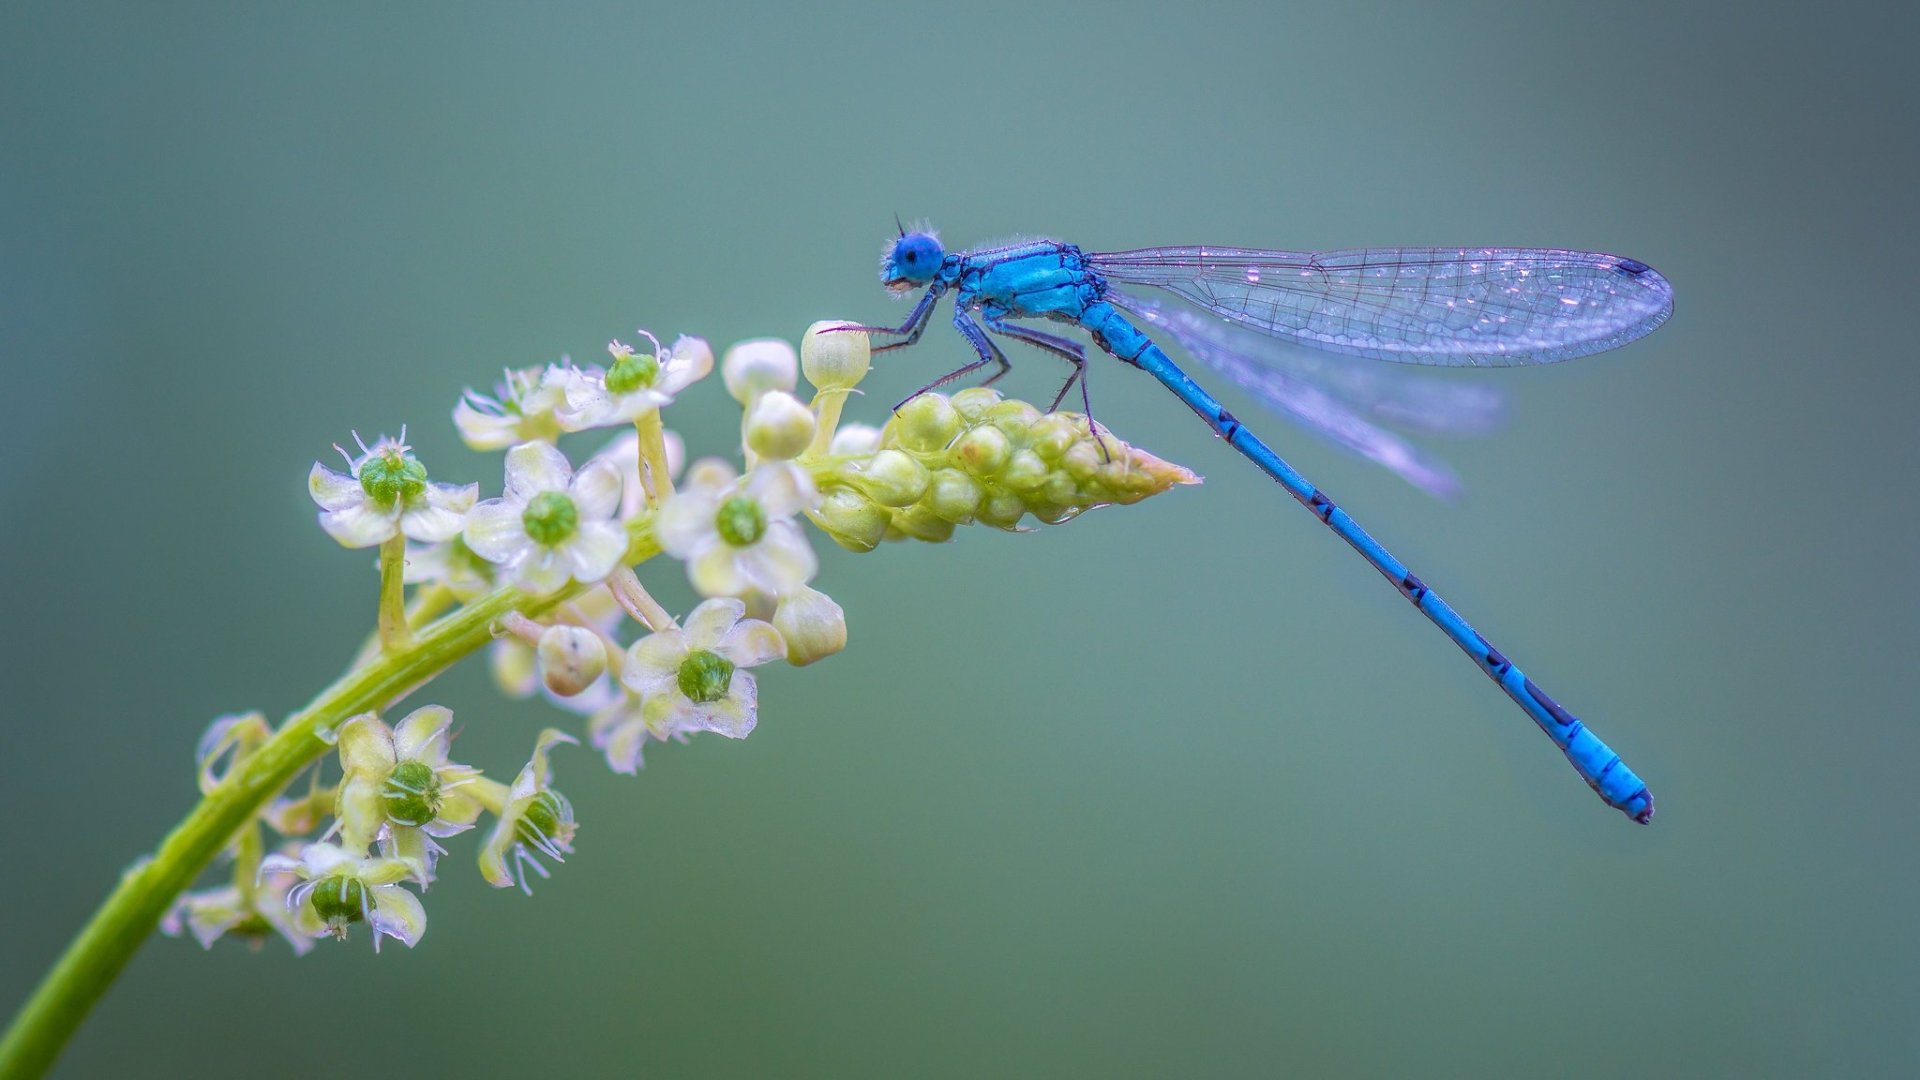 Download Flower Insect Macro Animal Dragonfly  HD Wallpaper